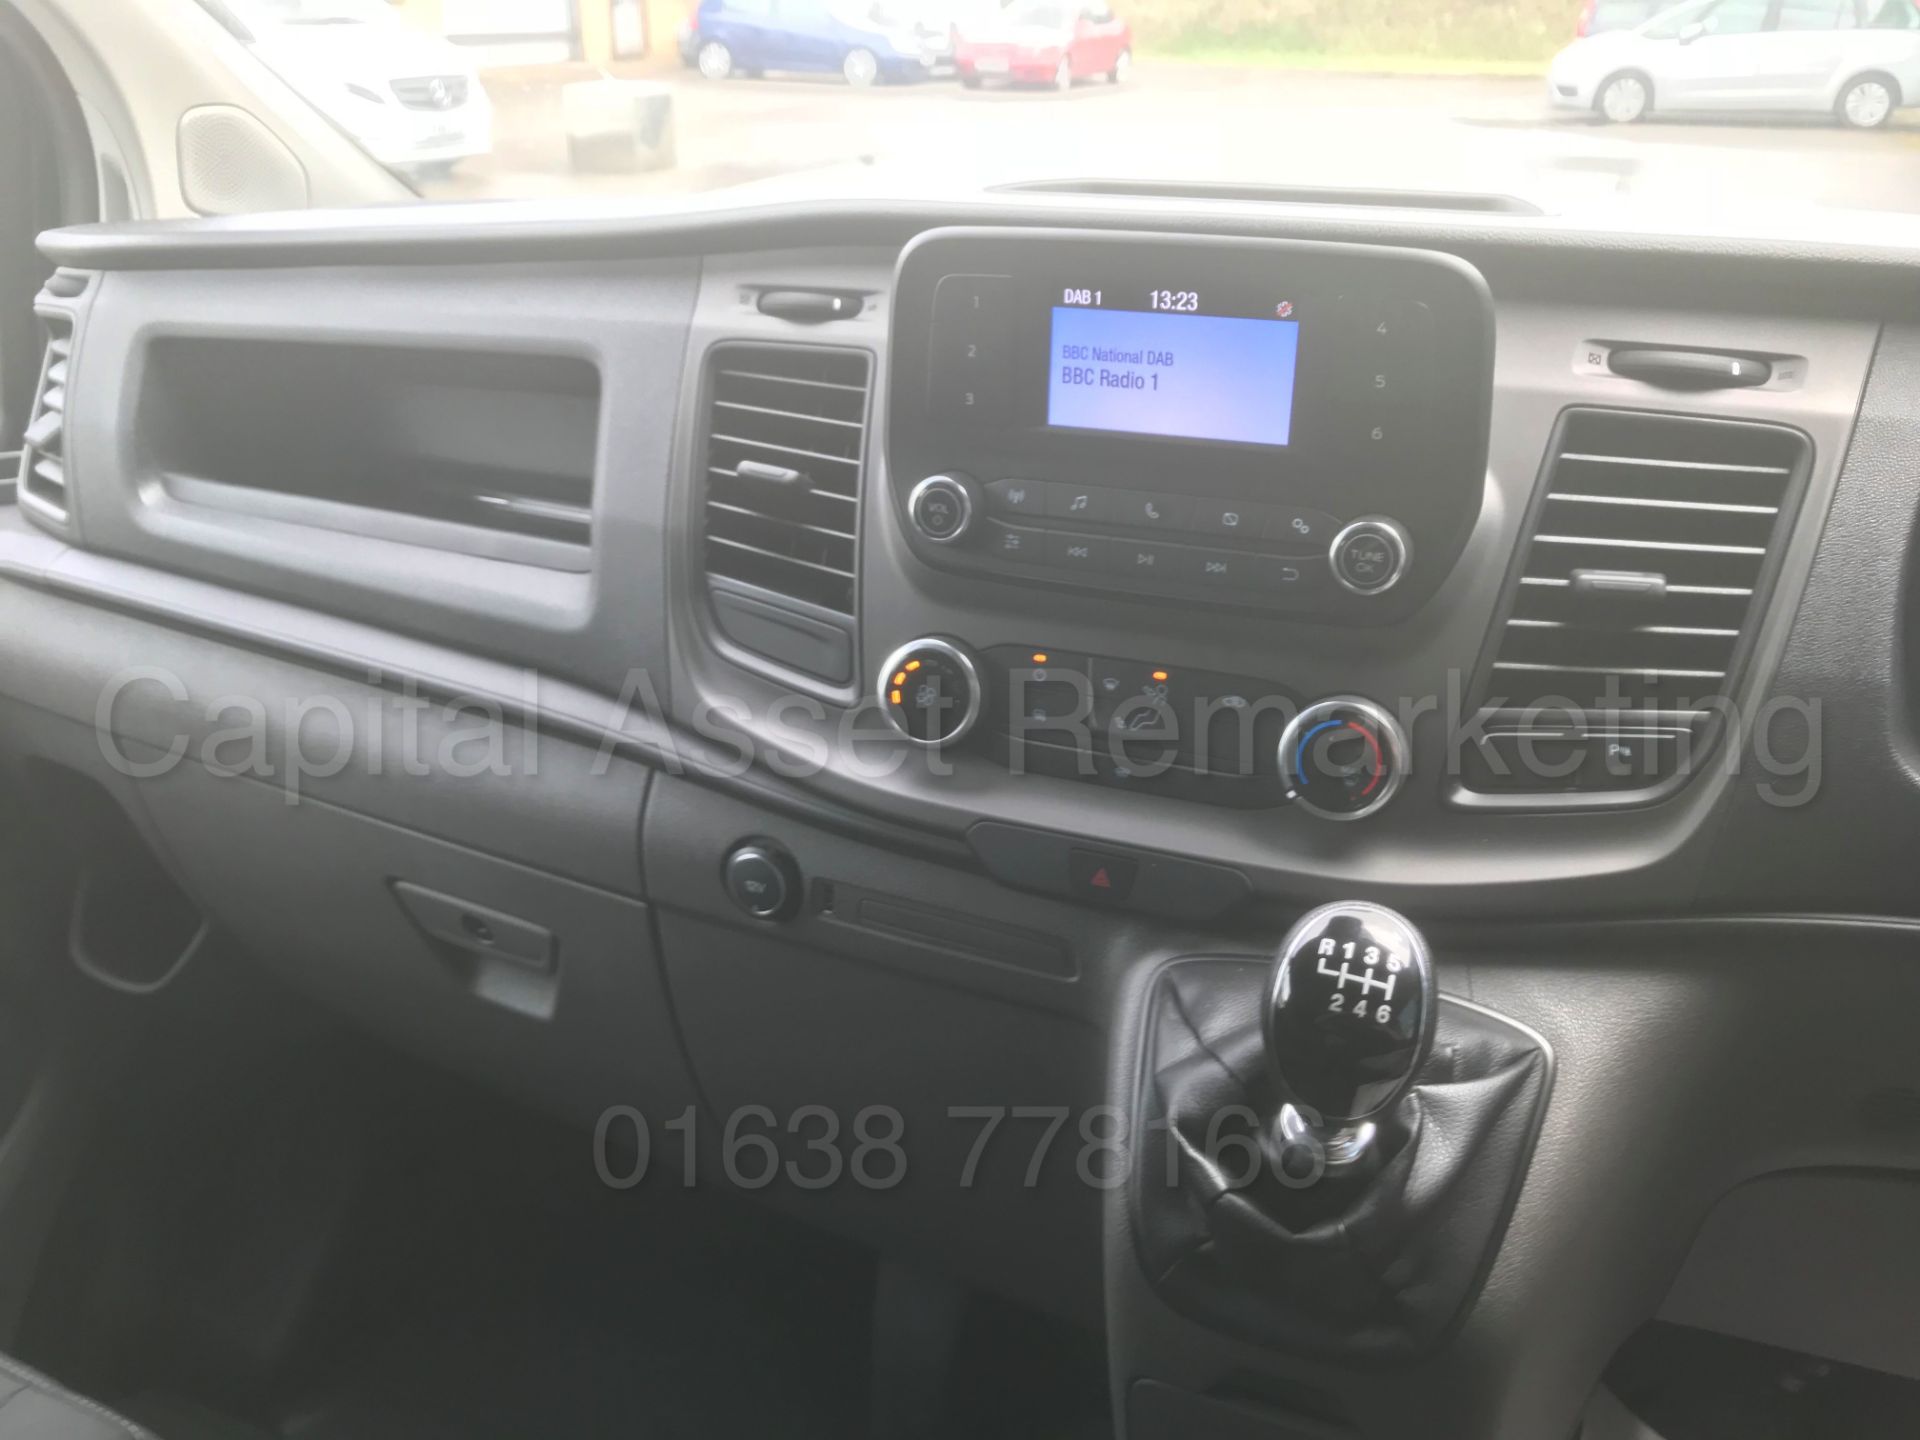 FORD TRANSIT CUSTOM *TREND EDITION* (2018 - ALL NEW MODEL) '2.0 TDCI - 6 SPEED' *DELIVERY MILEAGE* - Image 42 of 49